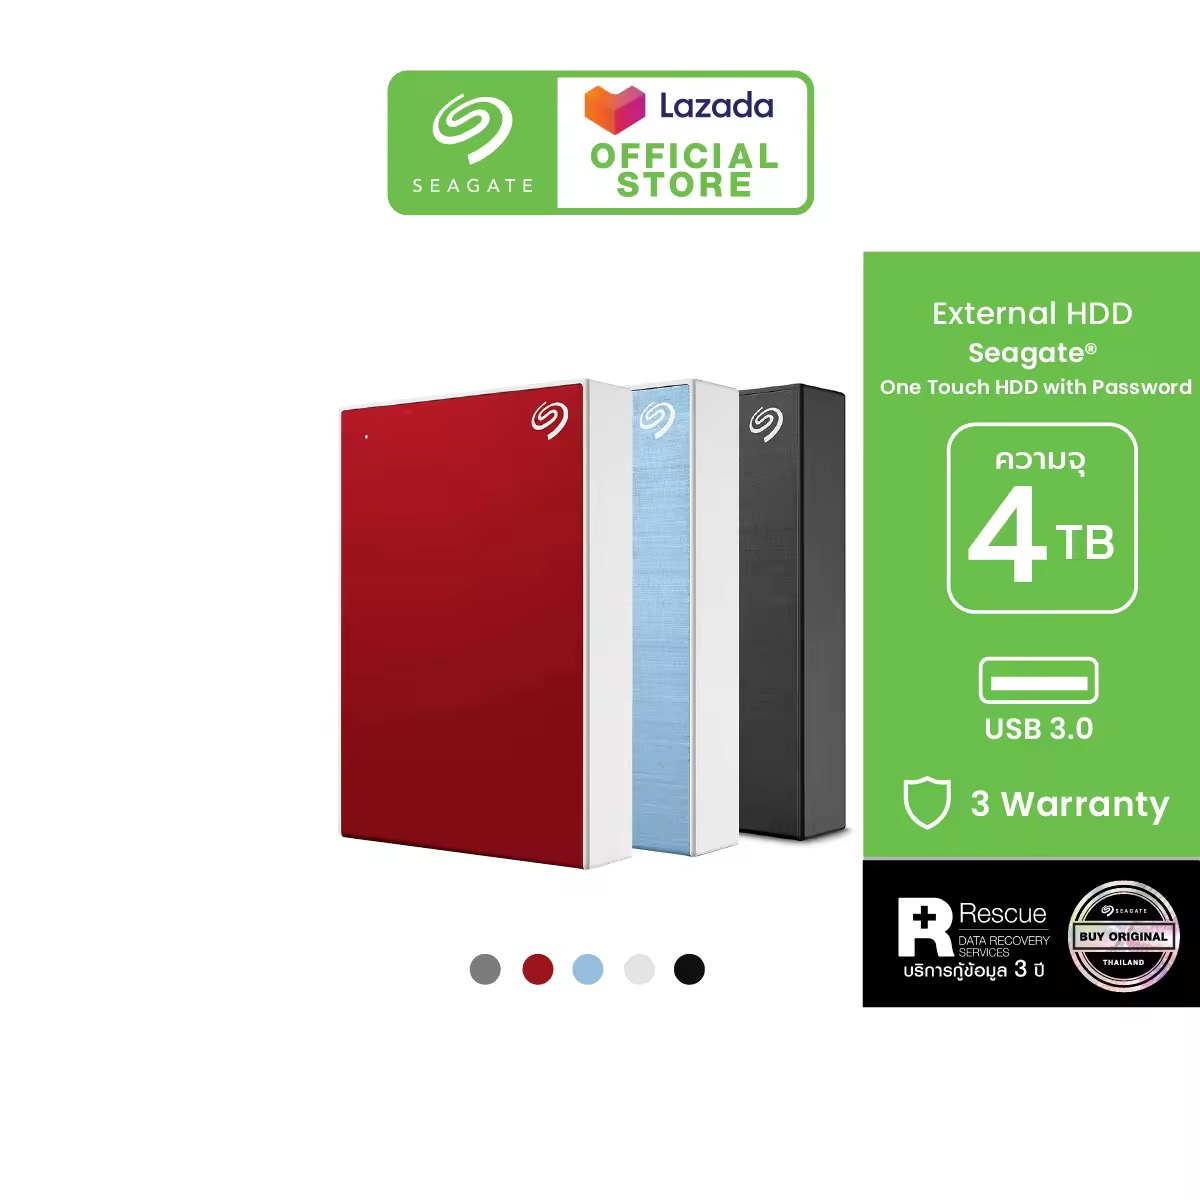 ] SEAGATE EXTERNAL HDD One Touch HDD with Password / 4TB / 2.5